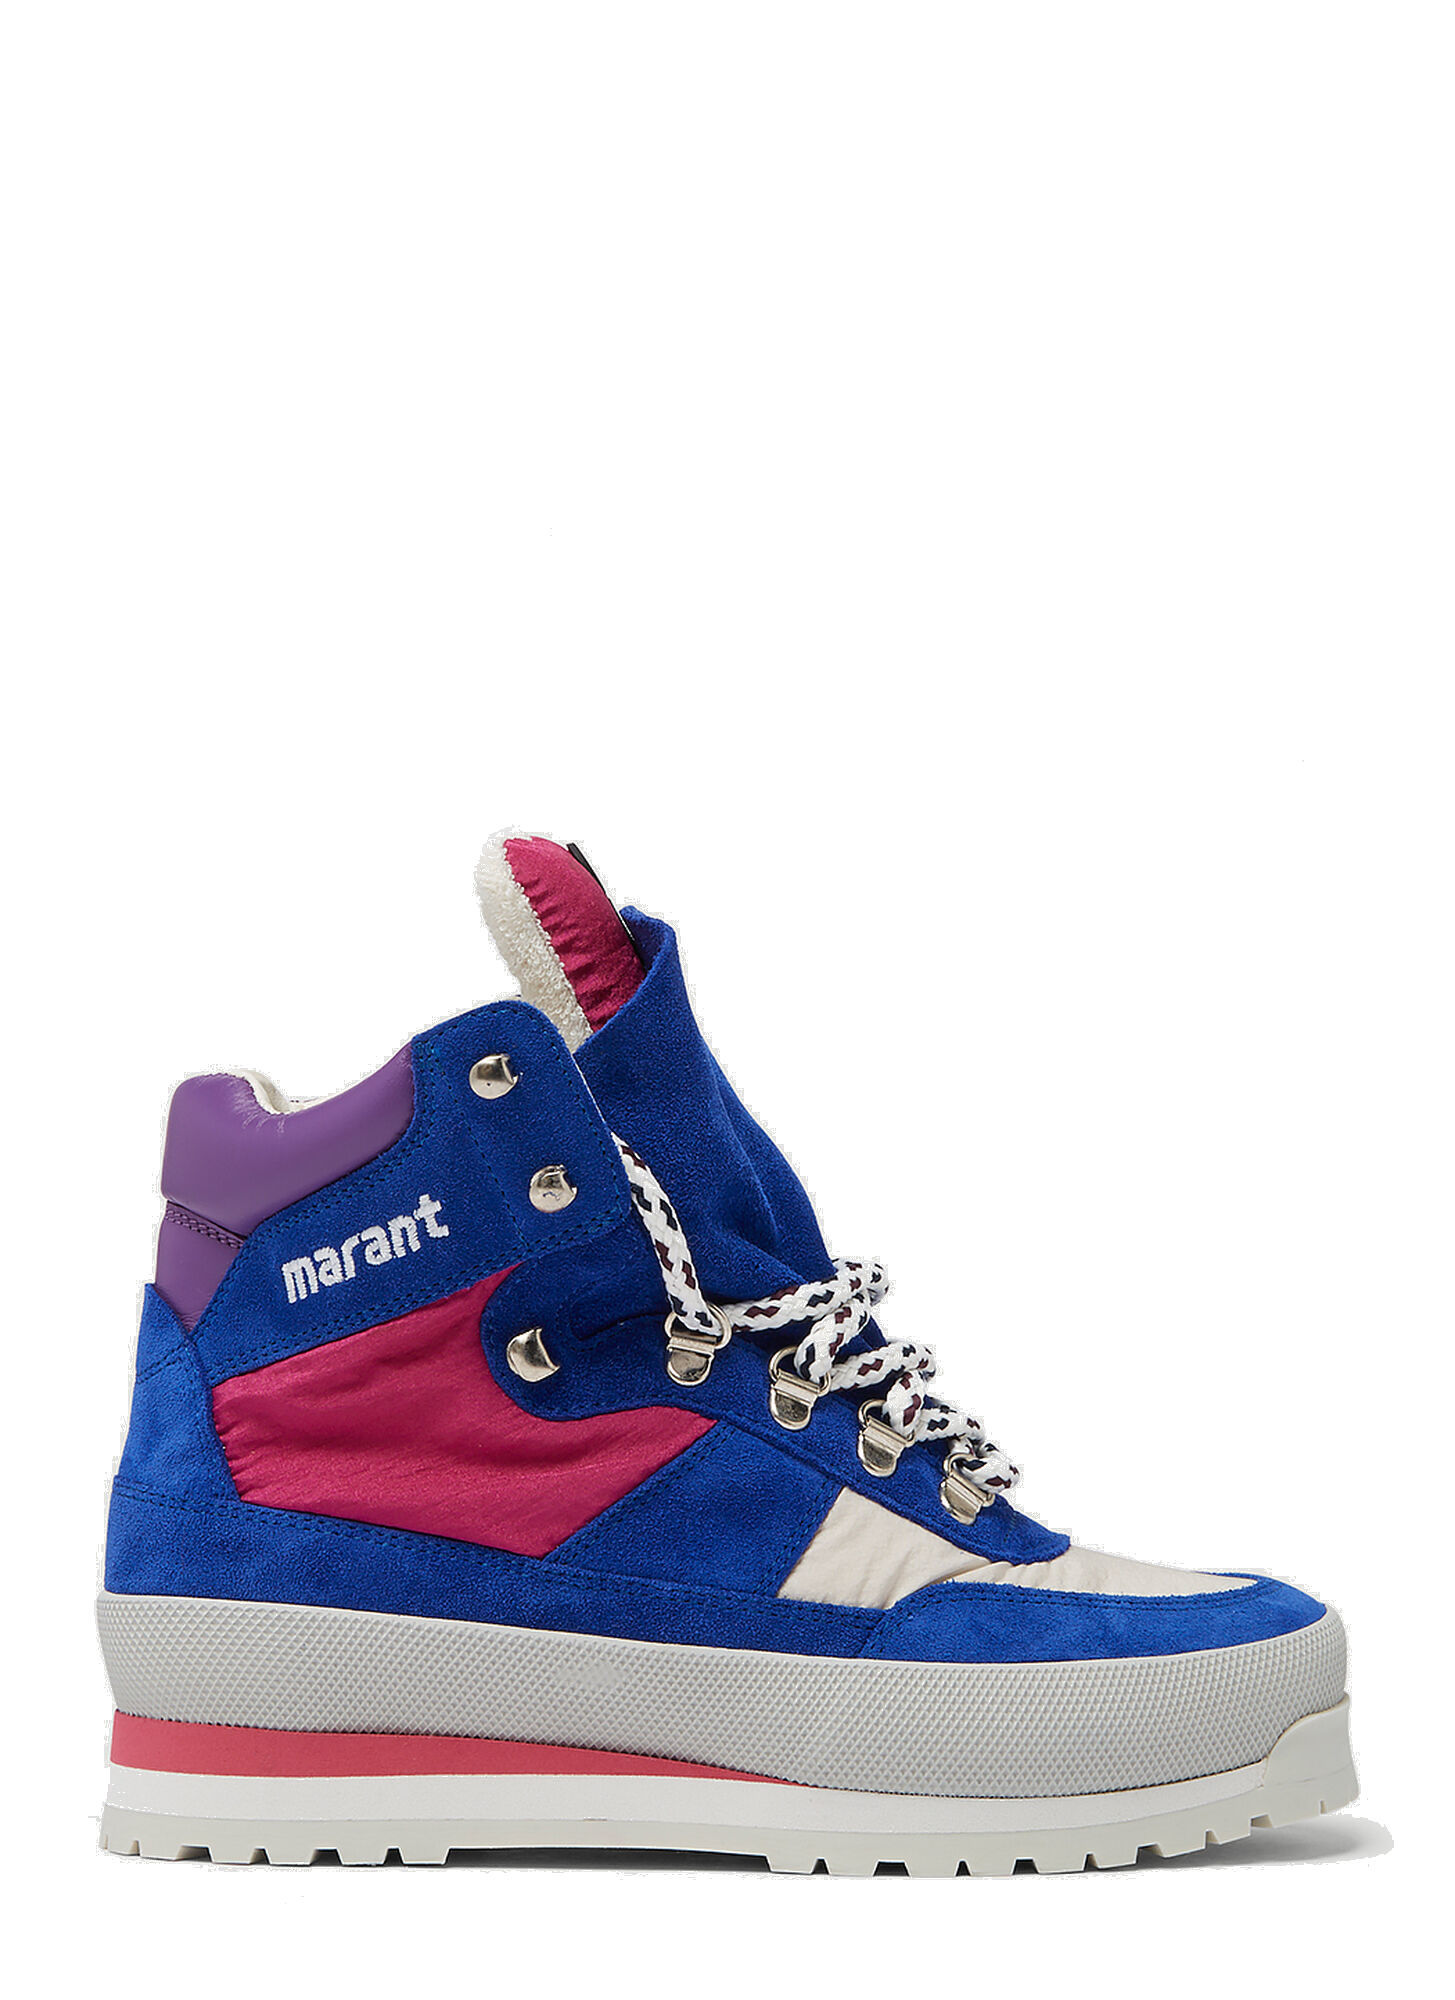 Bannry Wedge Sneakers in Blue